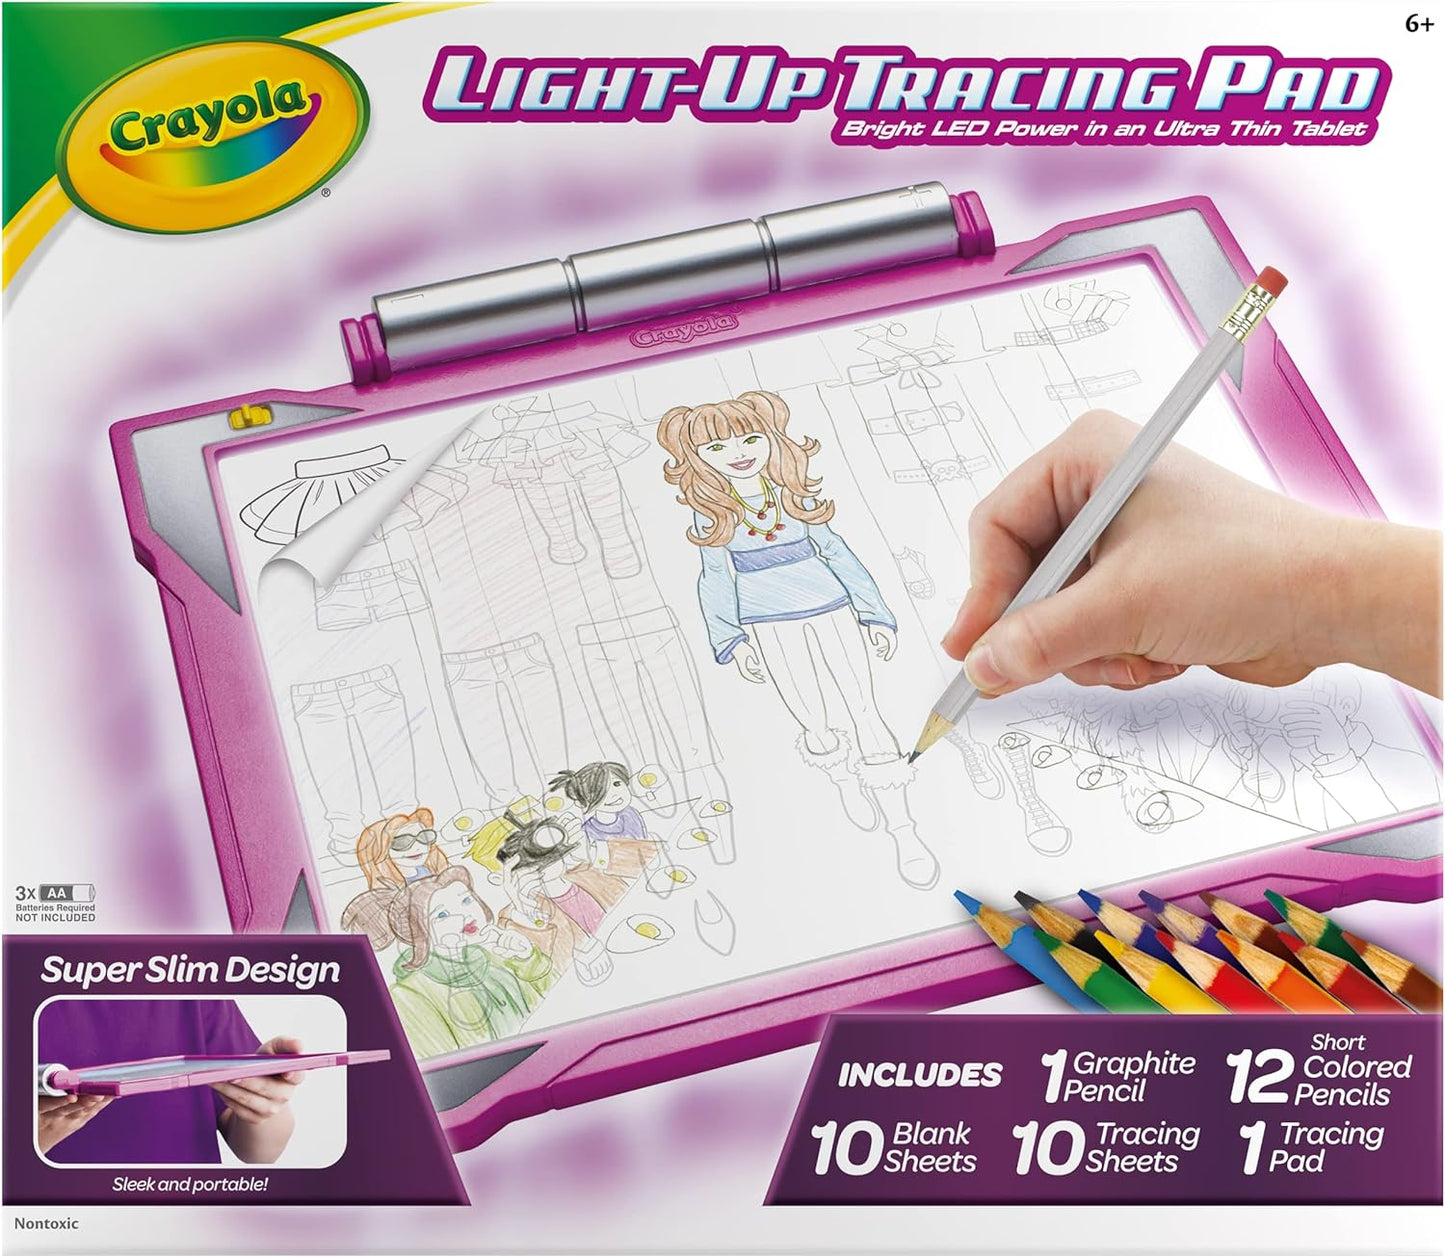 Crayola Light Up Tracing Pad - Pink, Drawing Pads for Kids, Kids Toys, Light Box, Birthday Gifts for Girls & Boys, Ages 6+ [Amazon Exclusive]